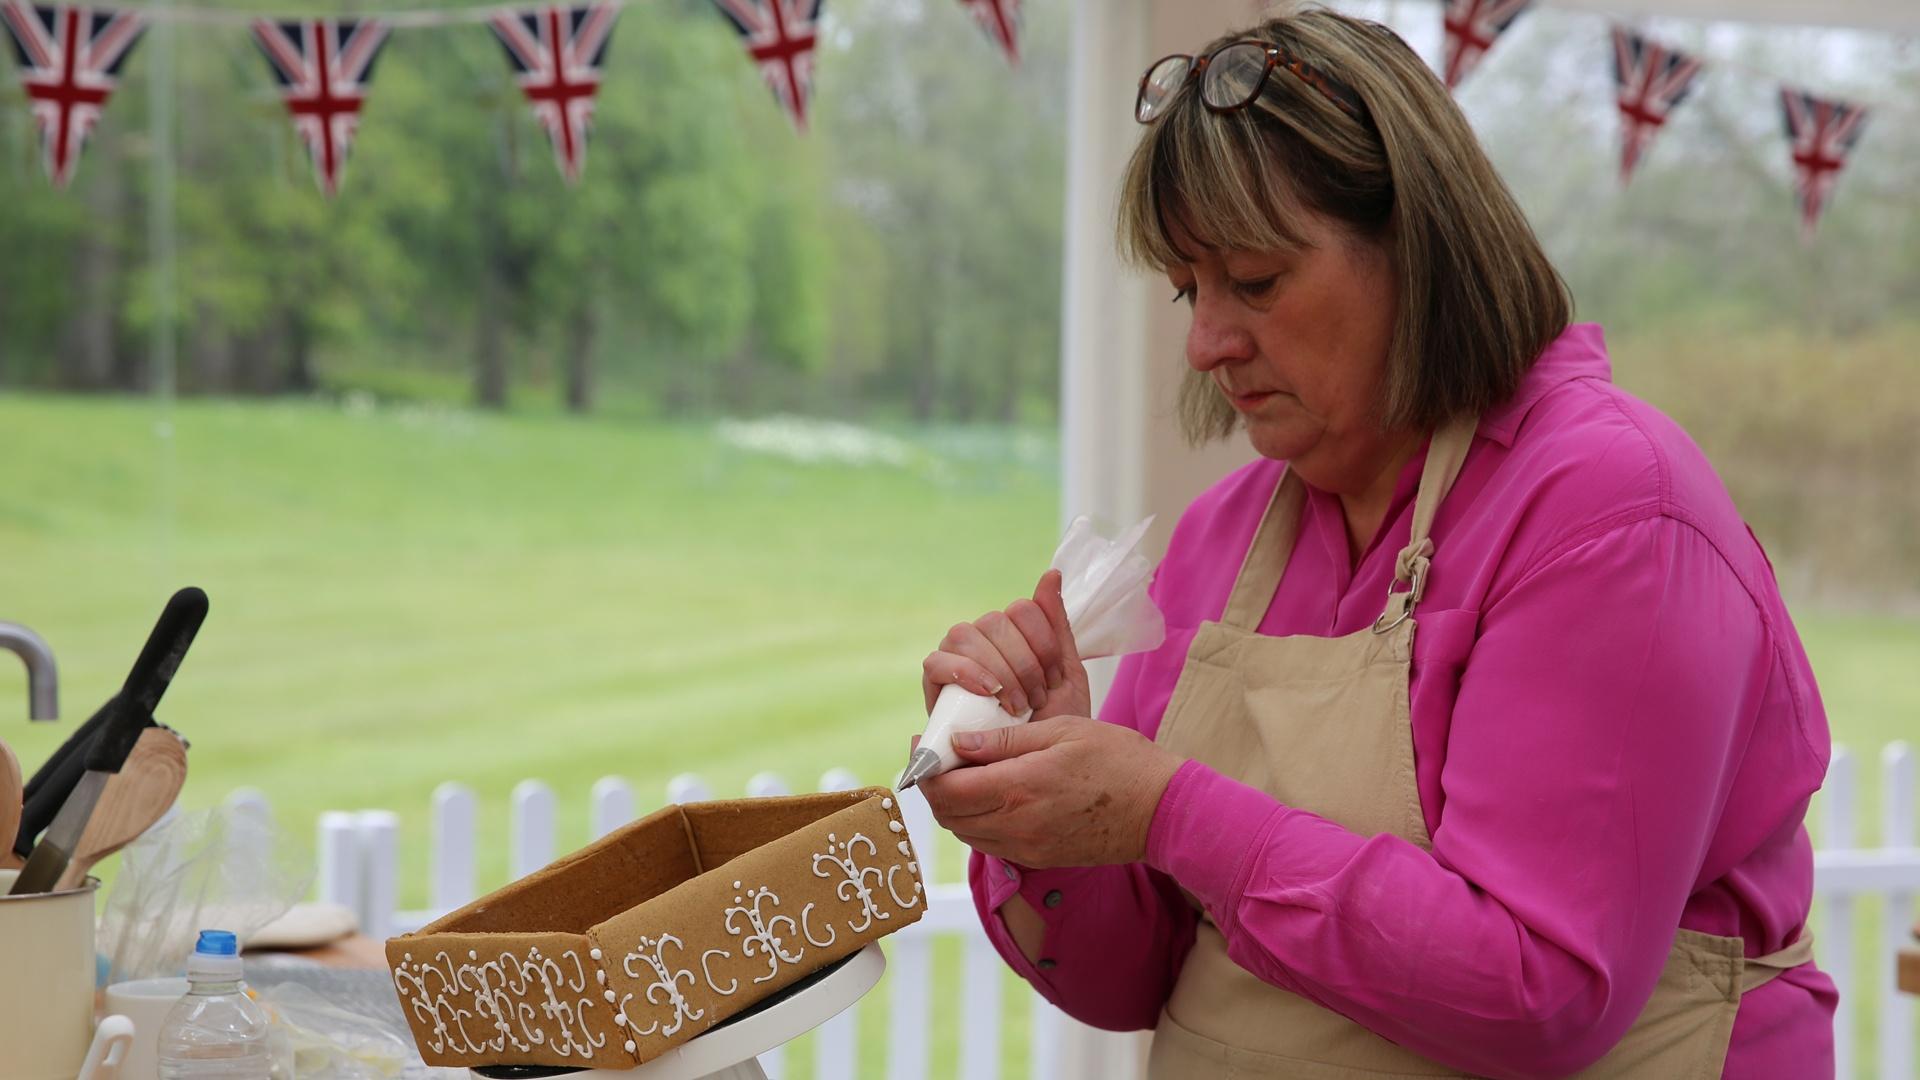 Watch Full Episodes Online of The Great British Baking Show on PBS